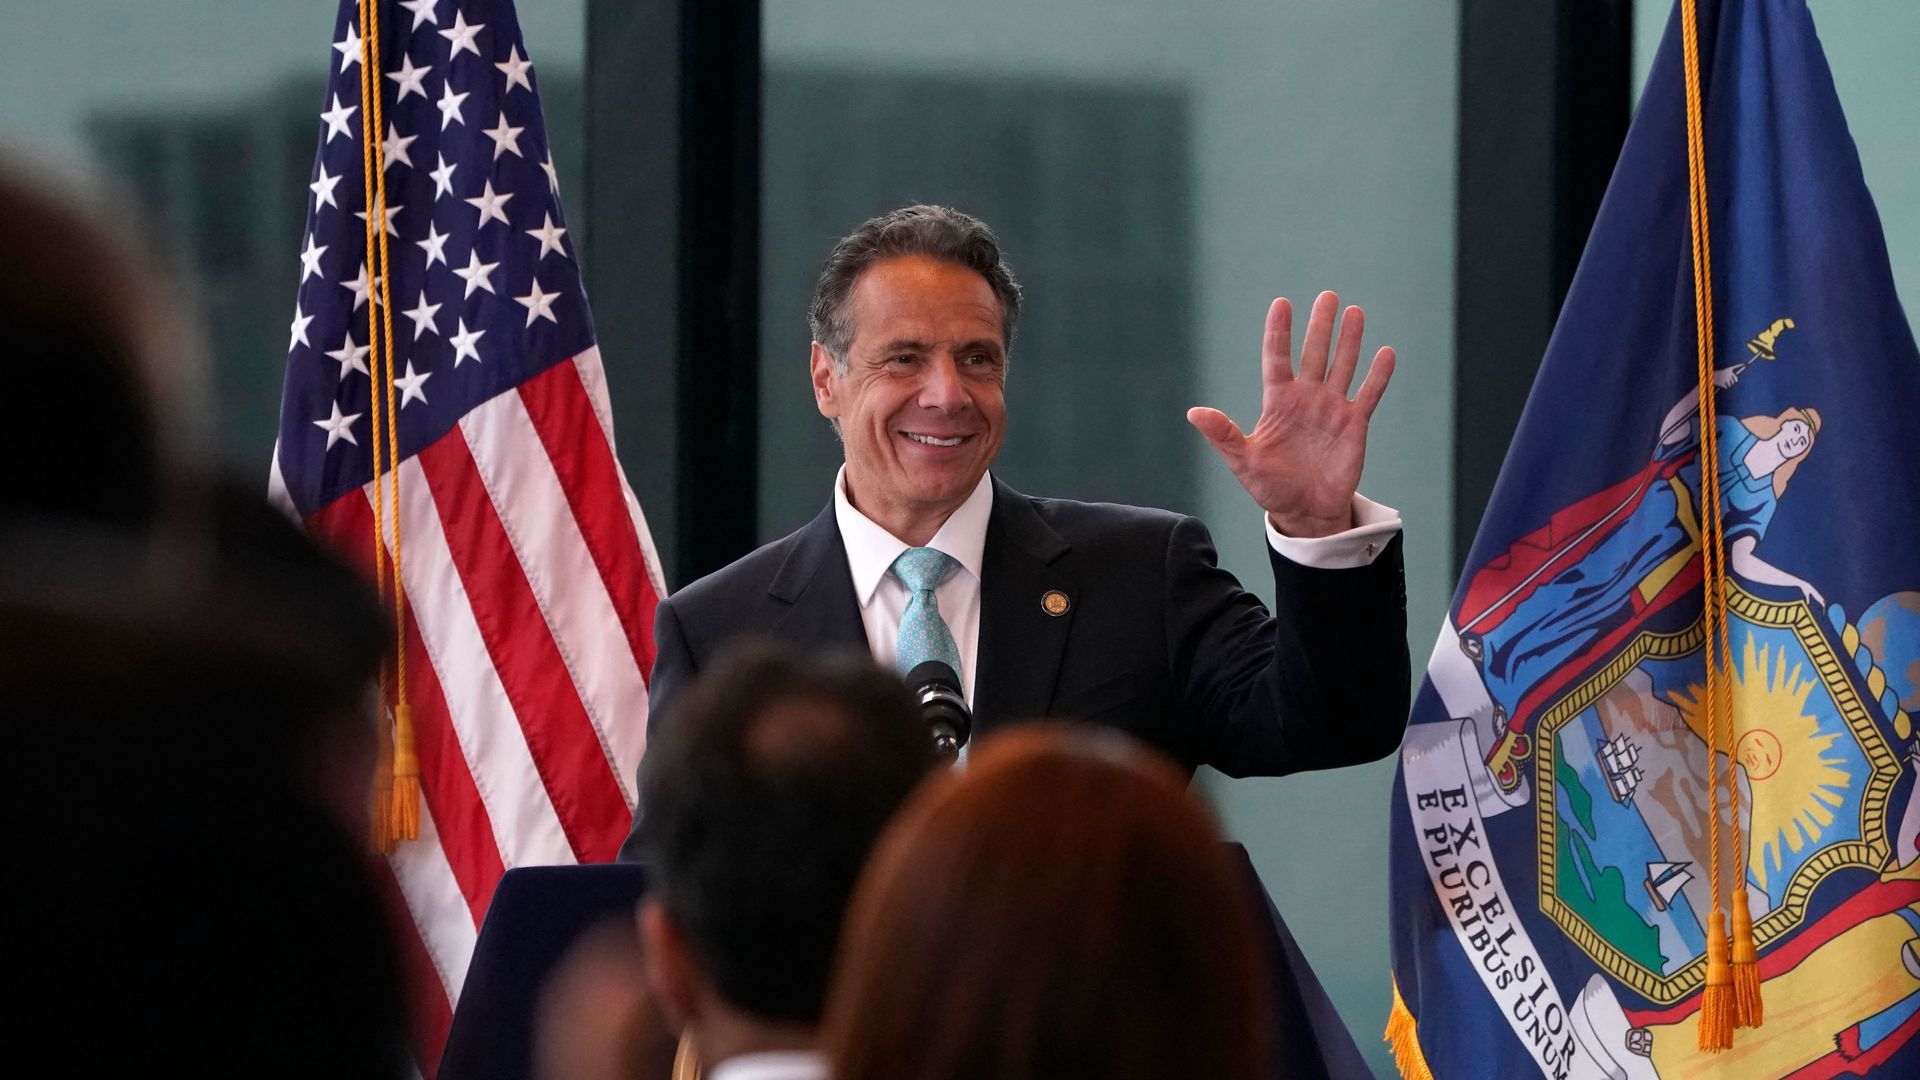 New York Governor Andrew Cuomo waves during an event to announce that New York will lift 'virtually all' Covid-19 restrictions.